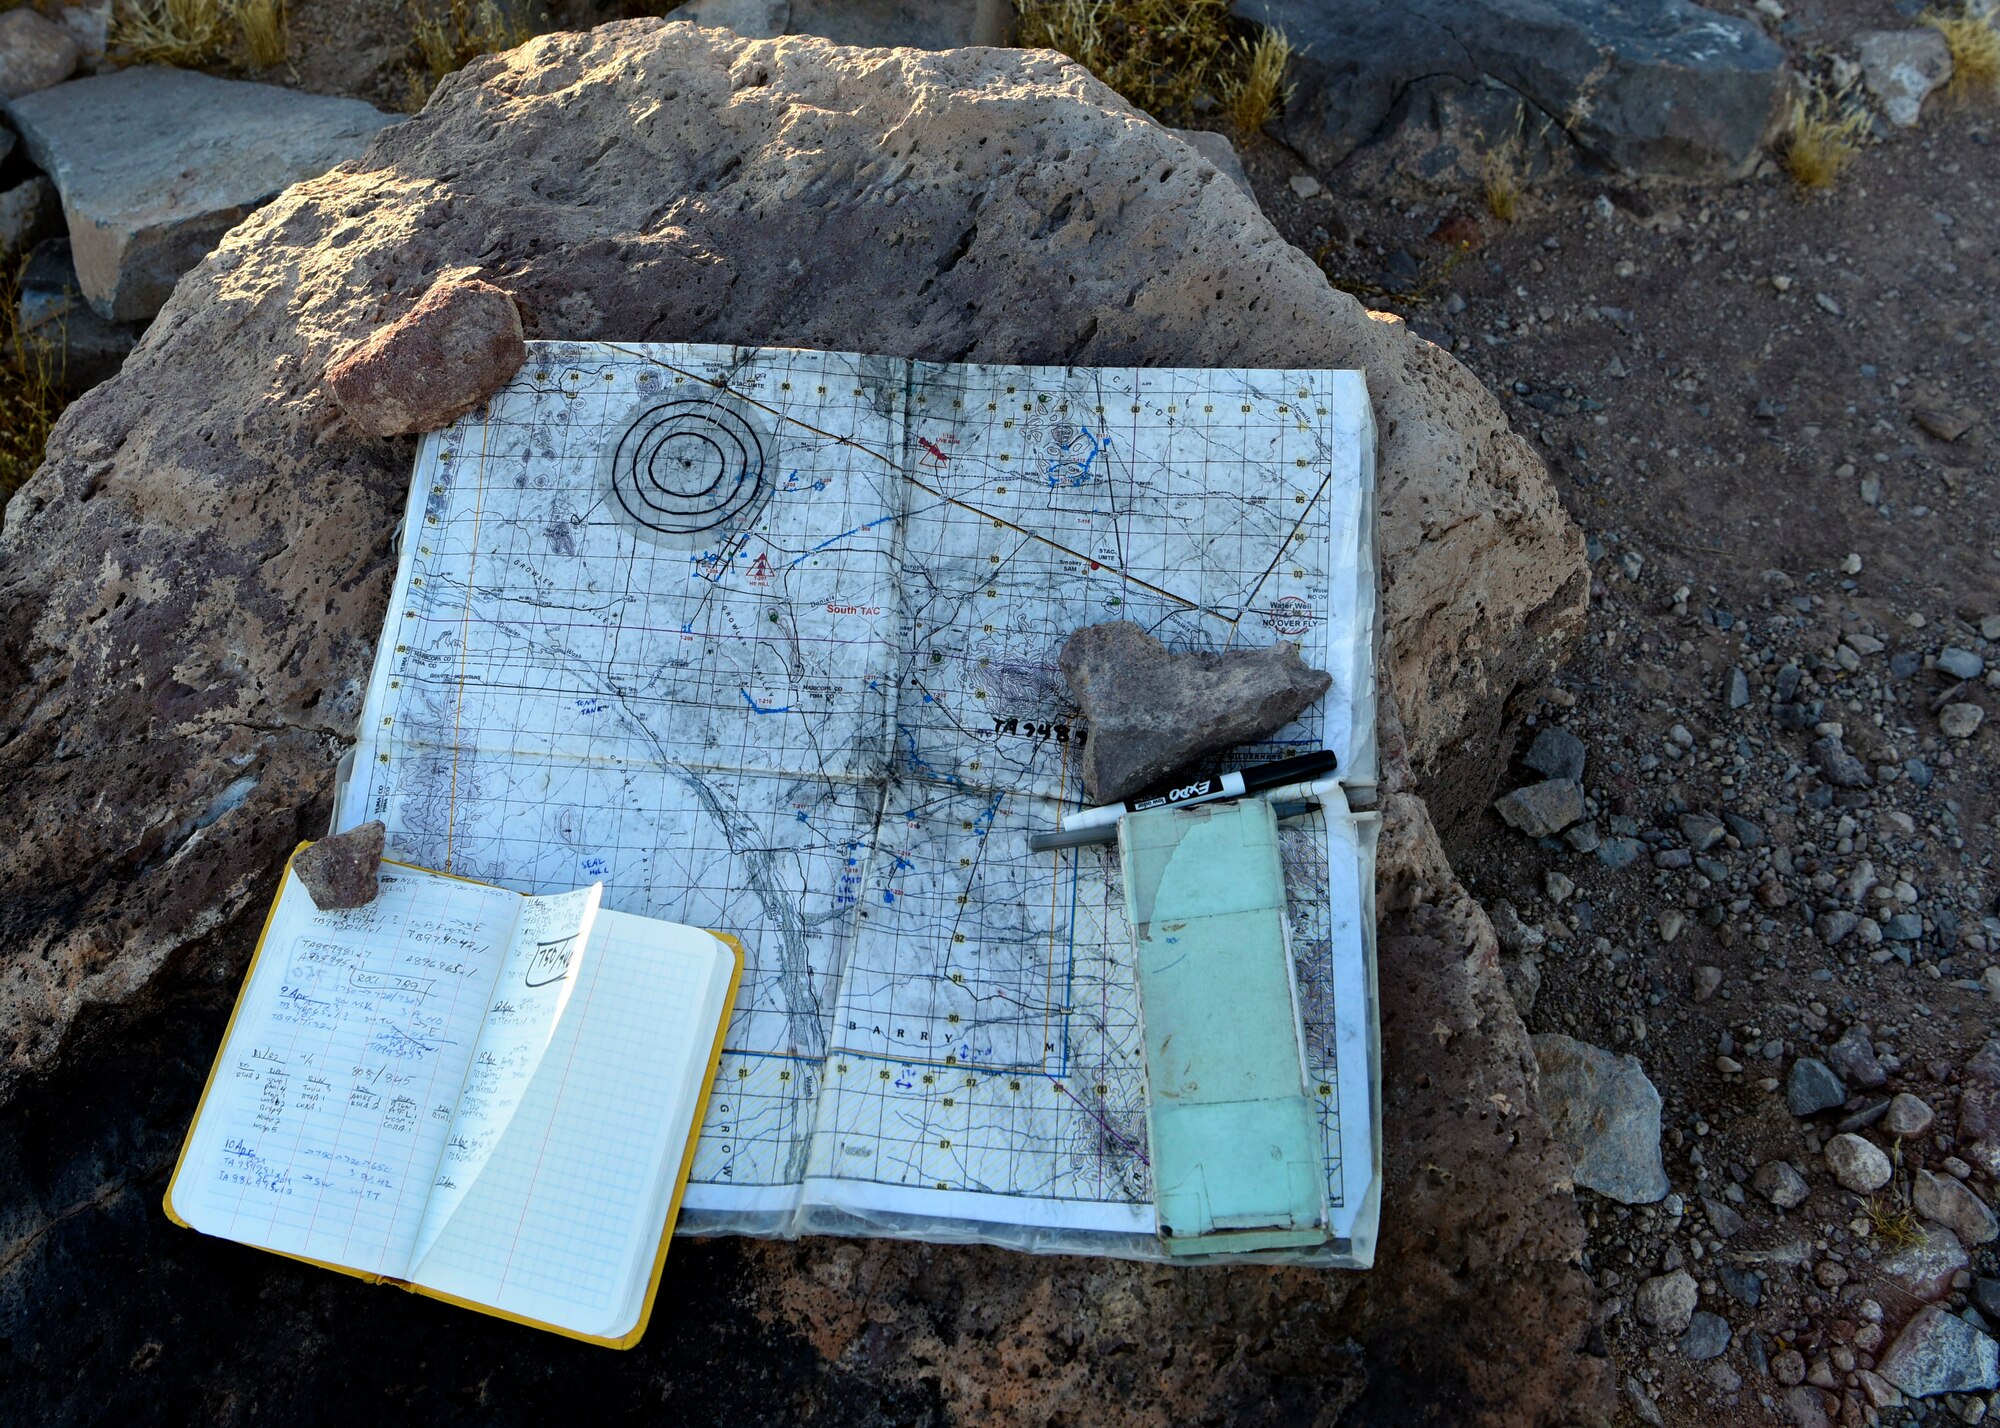 A map of Barry M. Goldwater Range East is laid out for biologists to plot coordinates of Sonoran pronghorn.